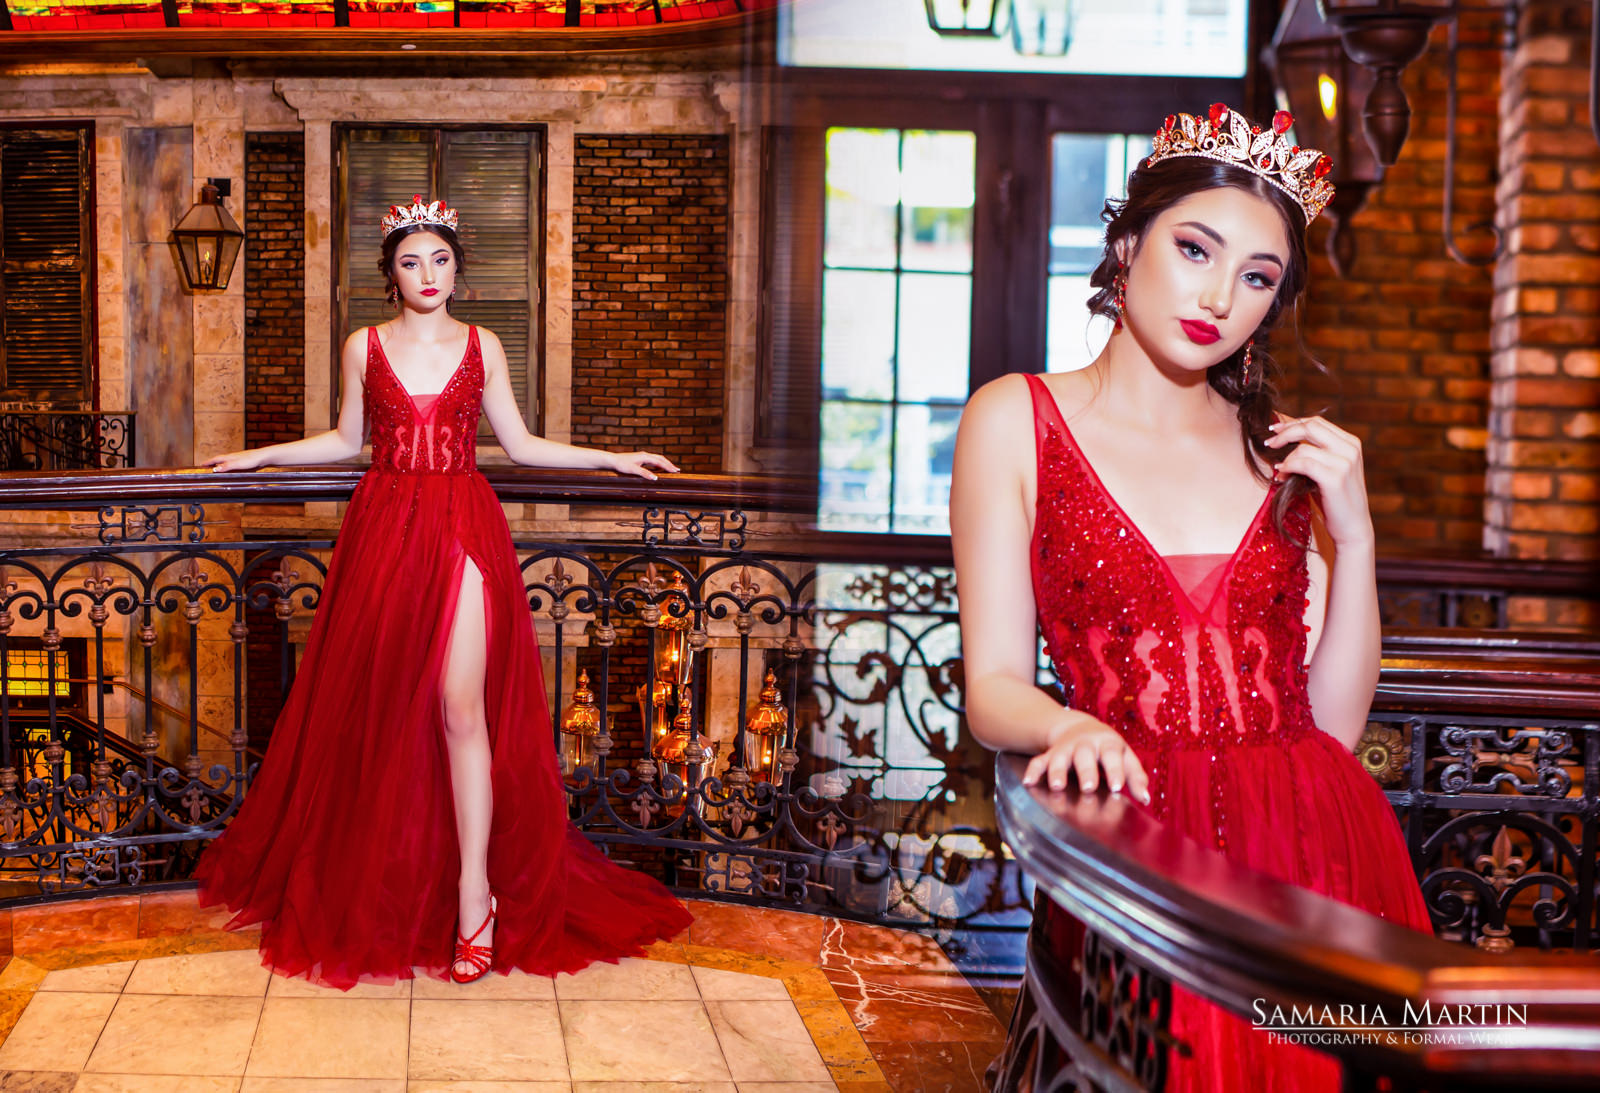 Miami Dress Rental, Red Morilee dresses, red quinceañera dresses, quinceañera dresses near me ...